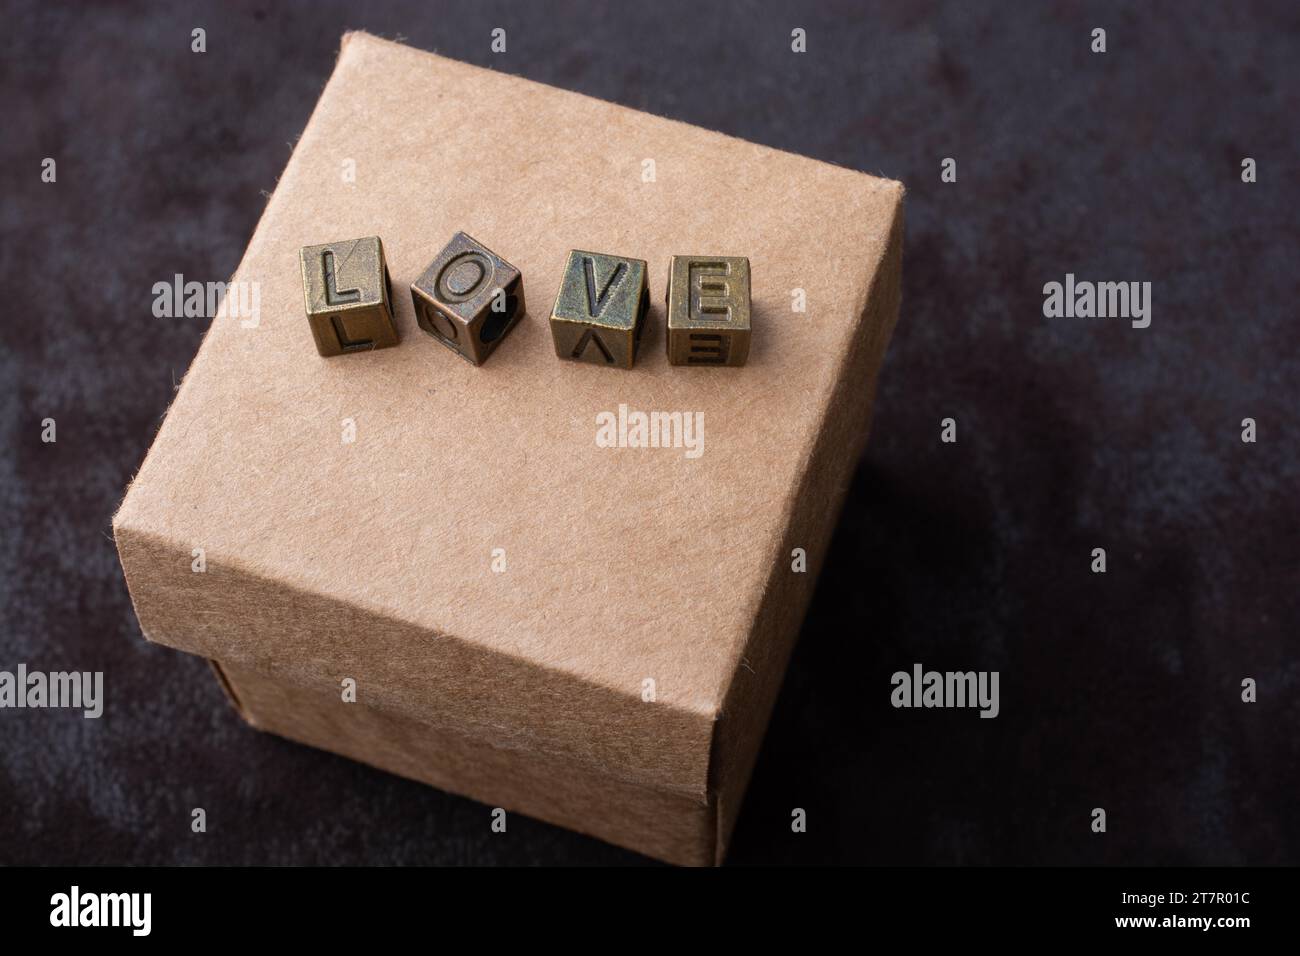 The word love with metal letters on box as love concept Stock Photo